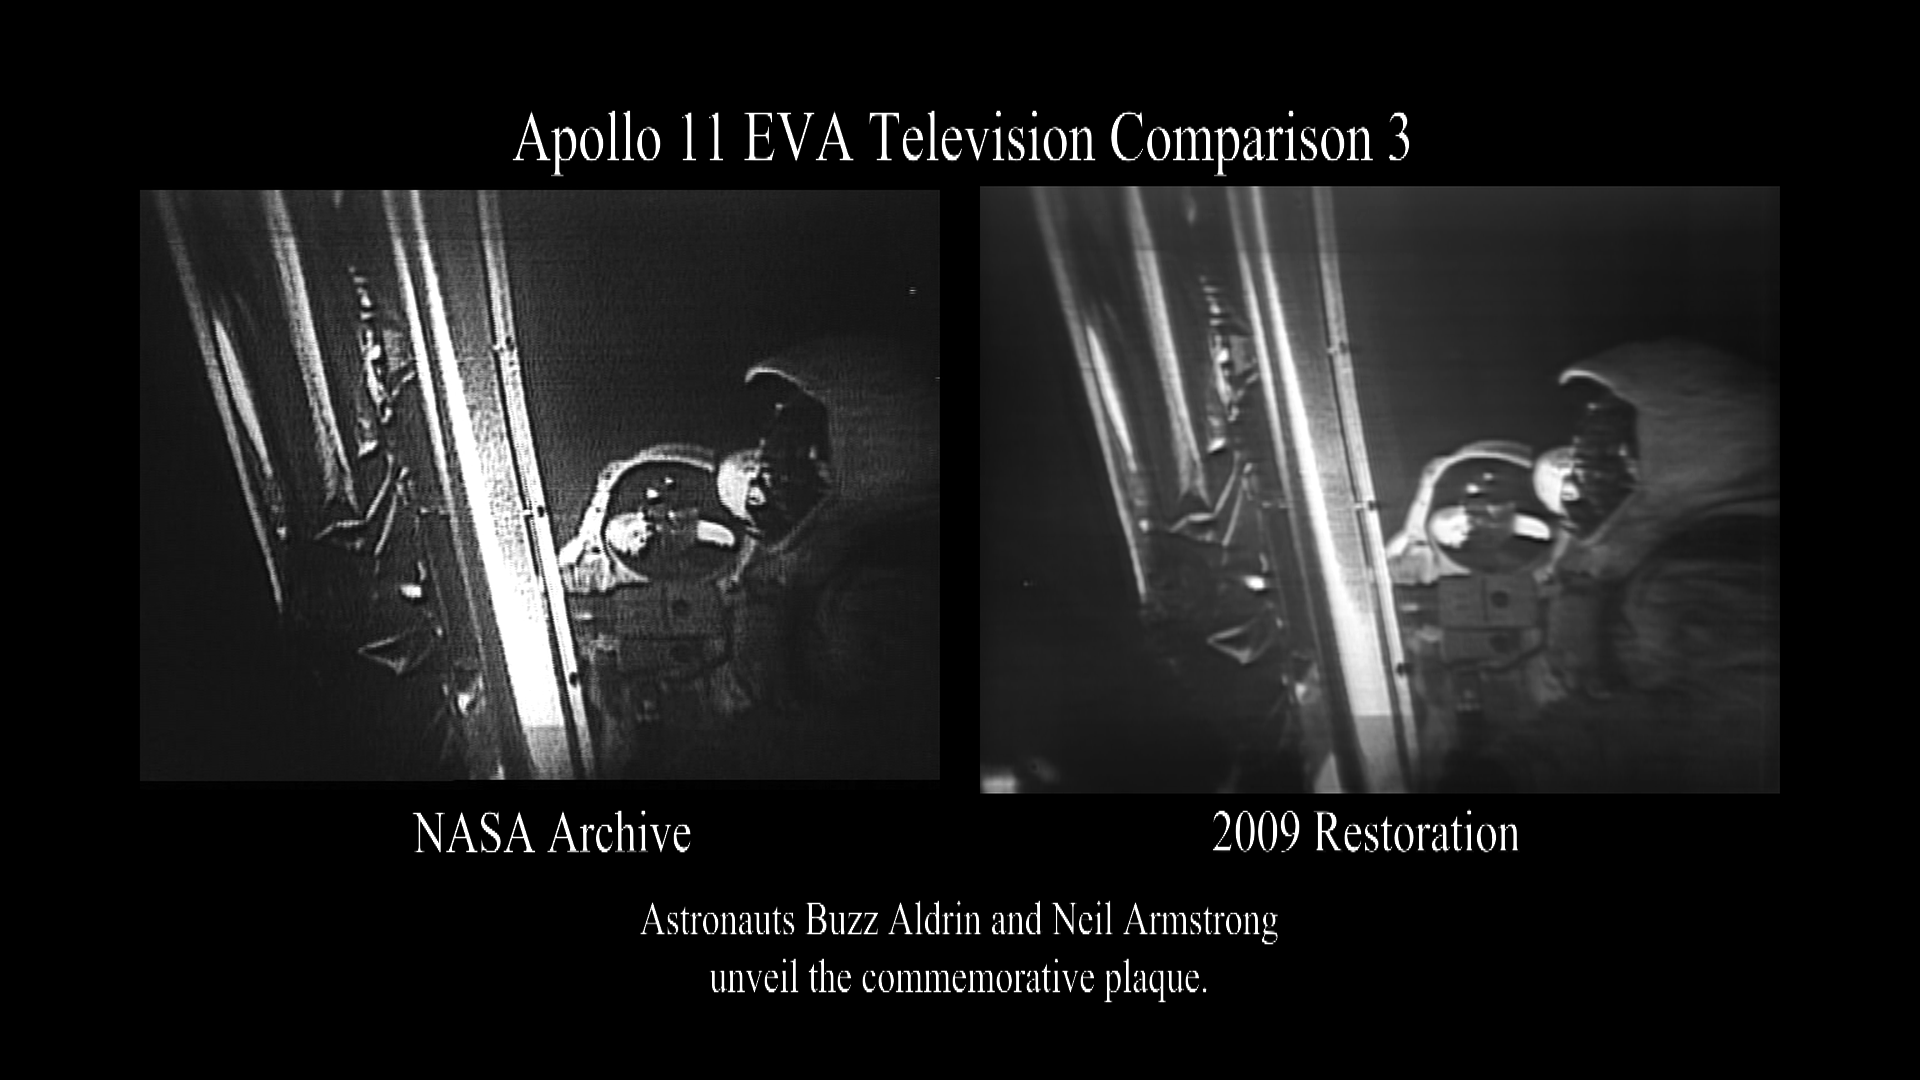 A side by sidy comparison of the original broadcast video and partially restored video of Astronauts Buzz Aldrin and Neil Armstrong unveil the commemorative plaque.